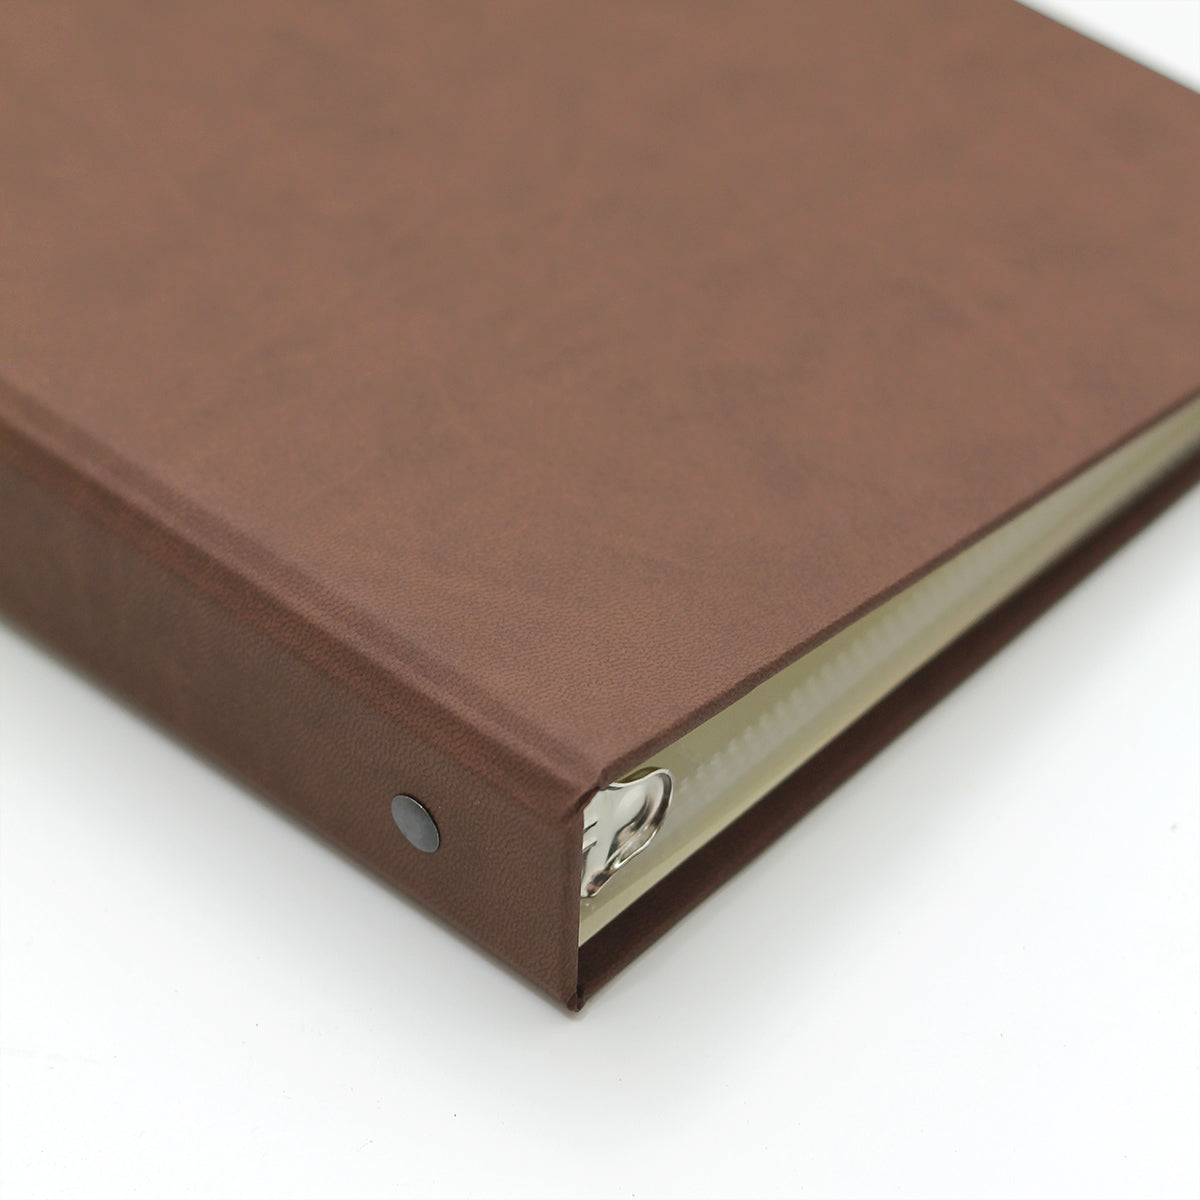 Leather Photo Album With Sleeves for 200 4x6 or 5x7 Photos -   Leather  photo albums, Personalized photo albums, Photo album design